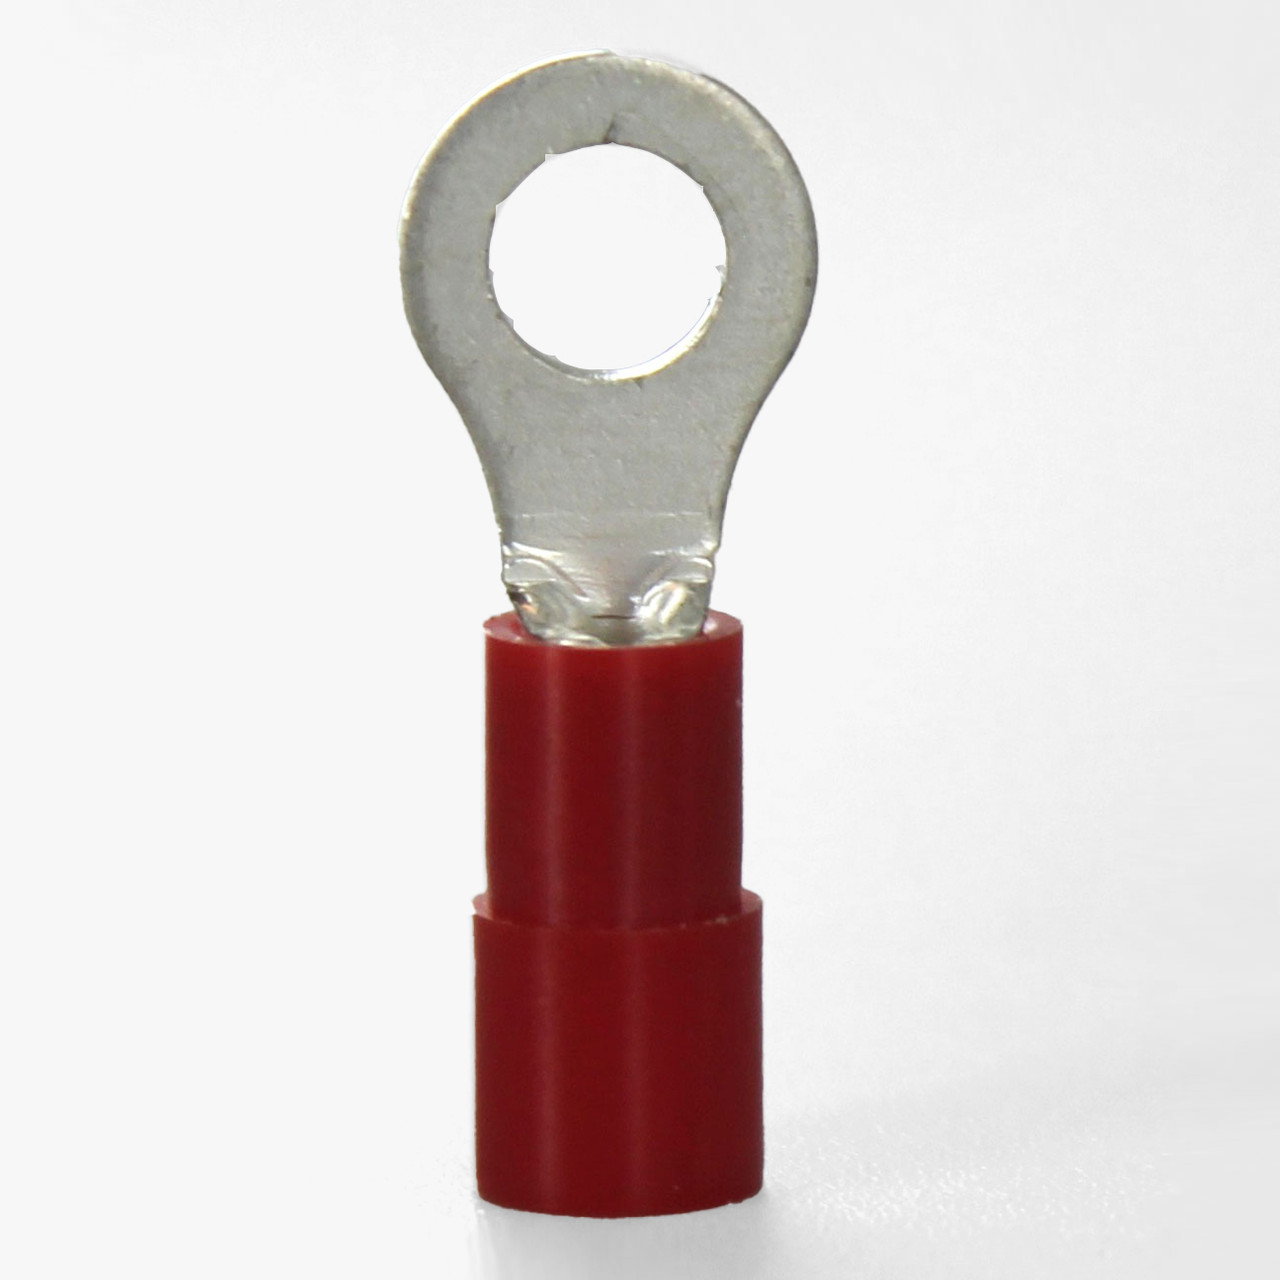 #8 Crimp-On Ring Terminal for use with 22-16 Gauge Wire Sizes.